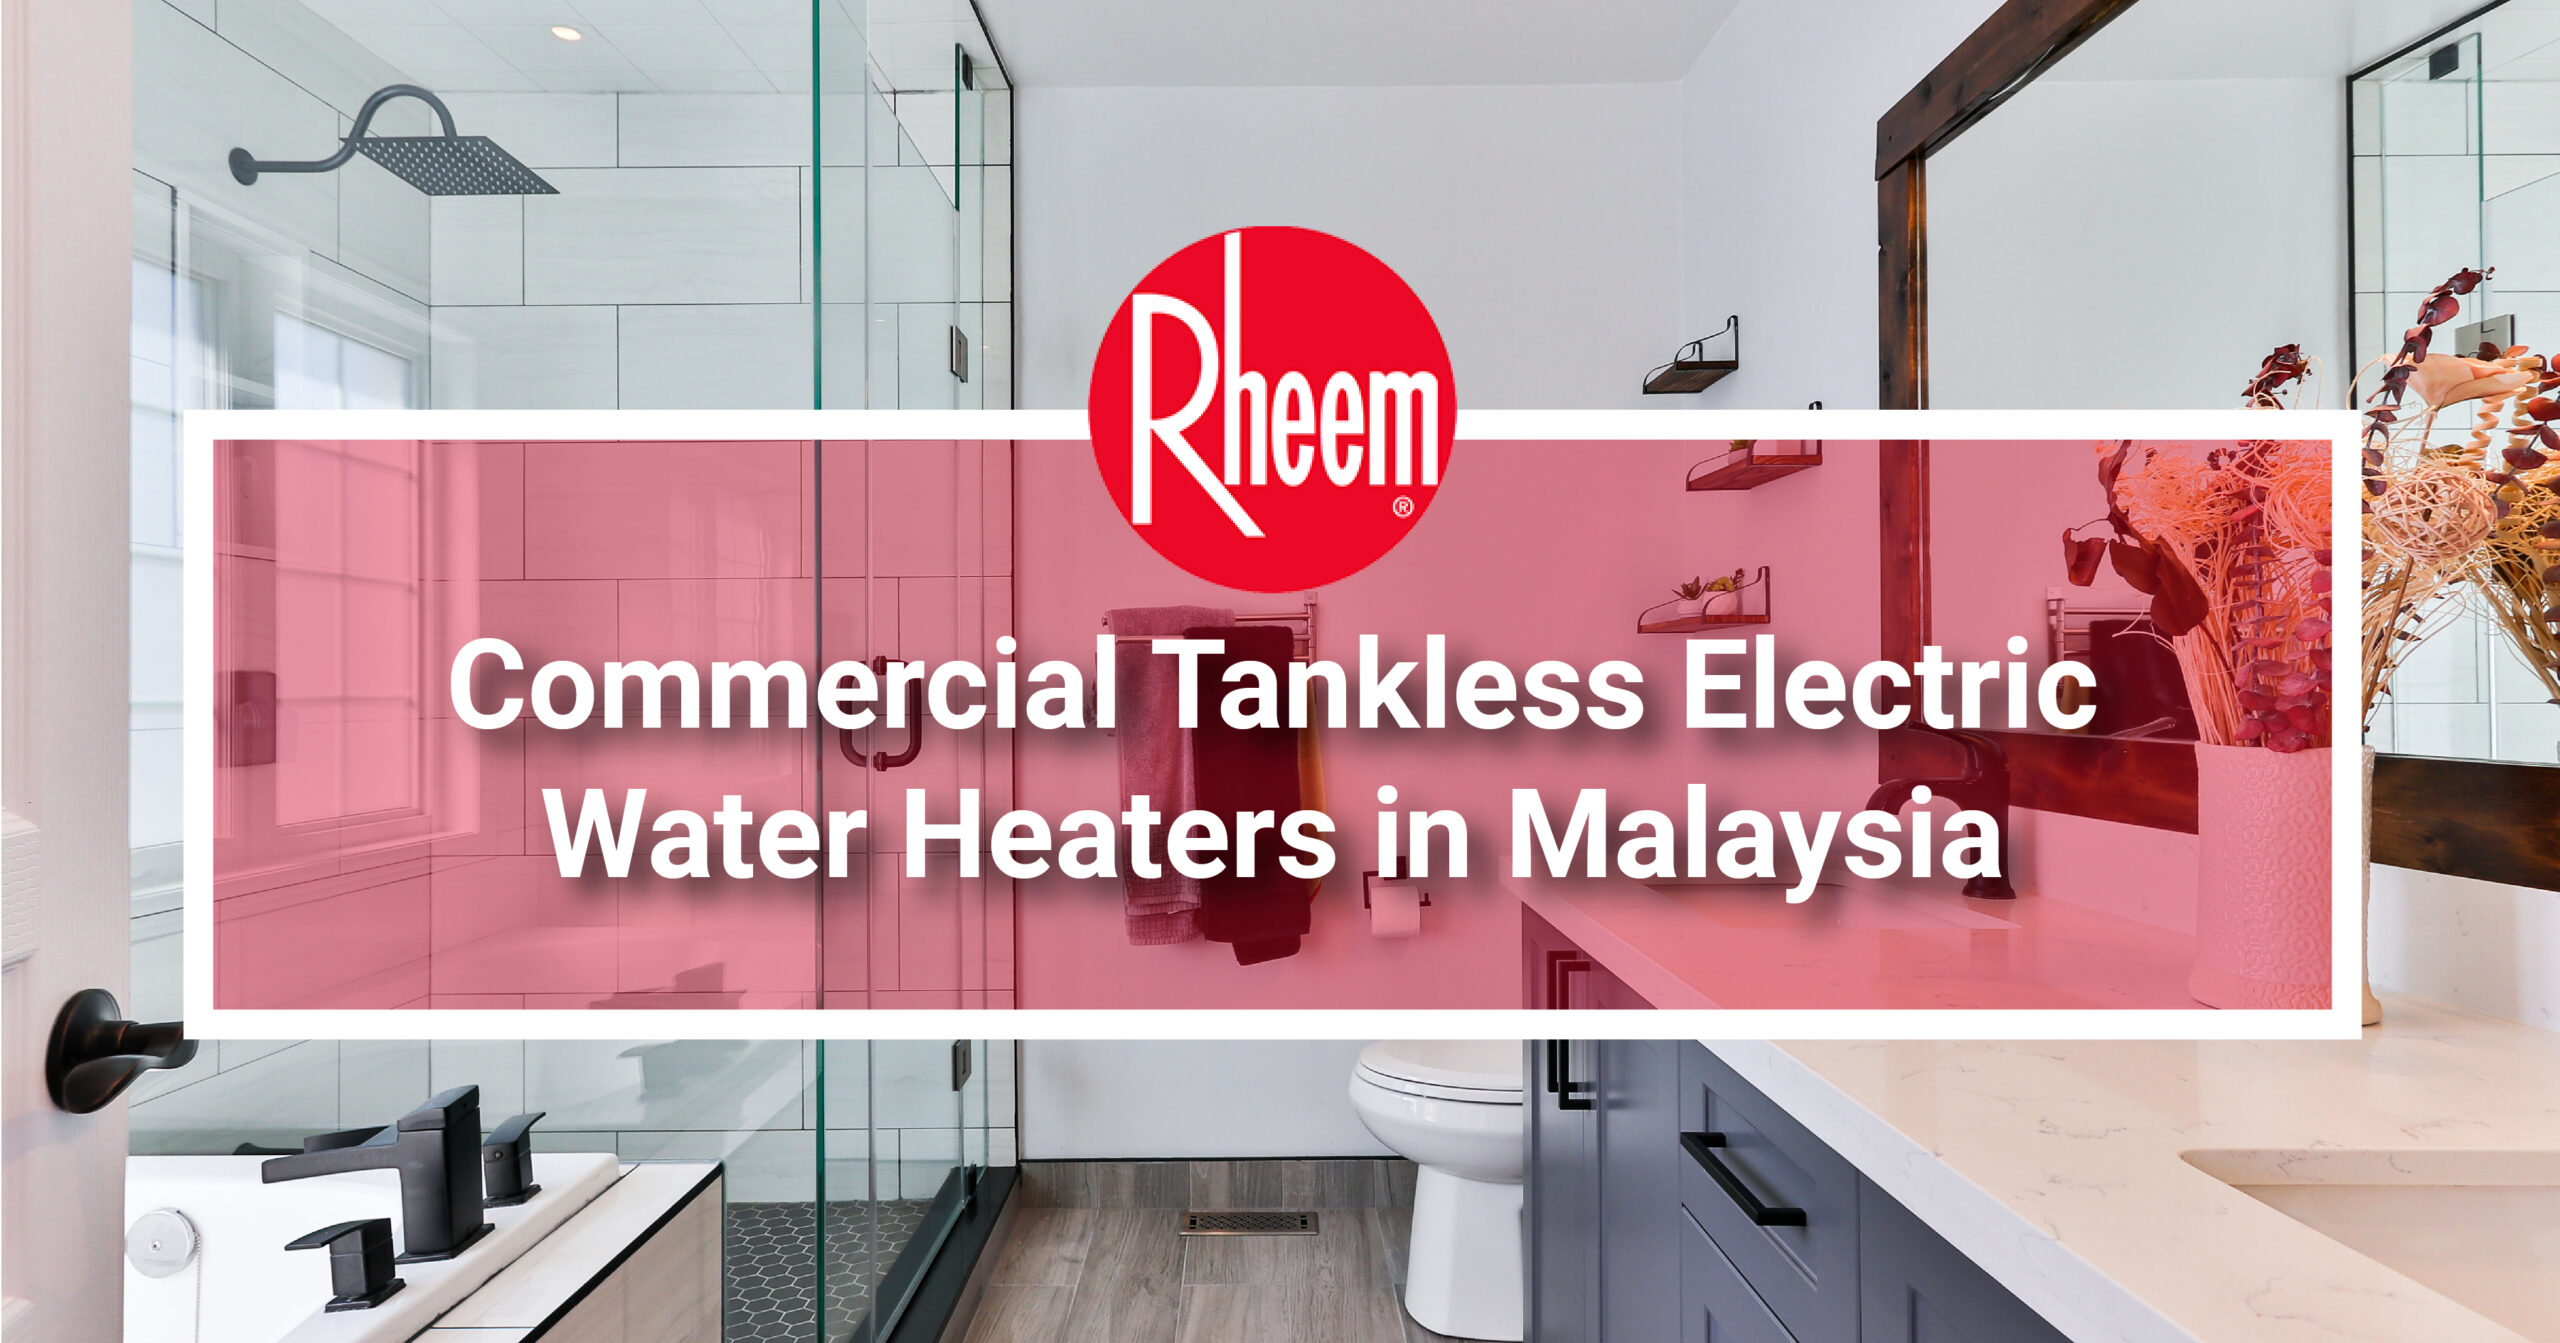 Commercial Tankless Electric Water Heaters in Malaysia